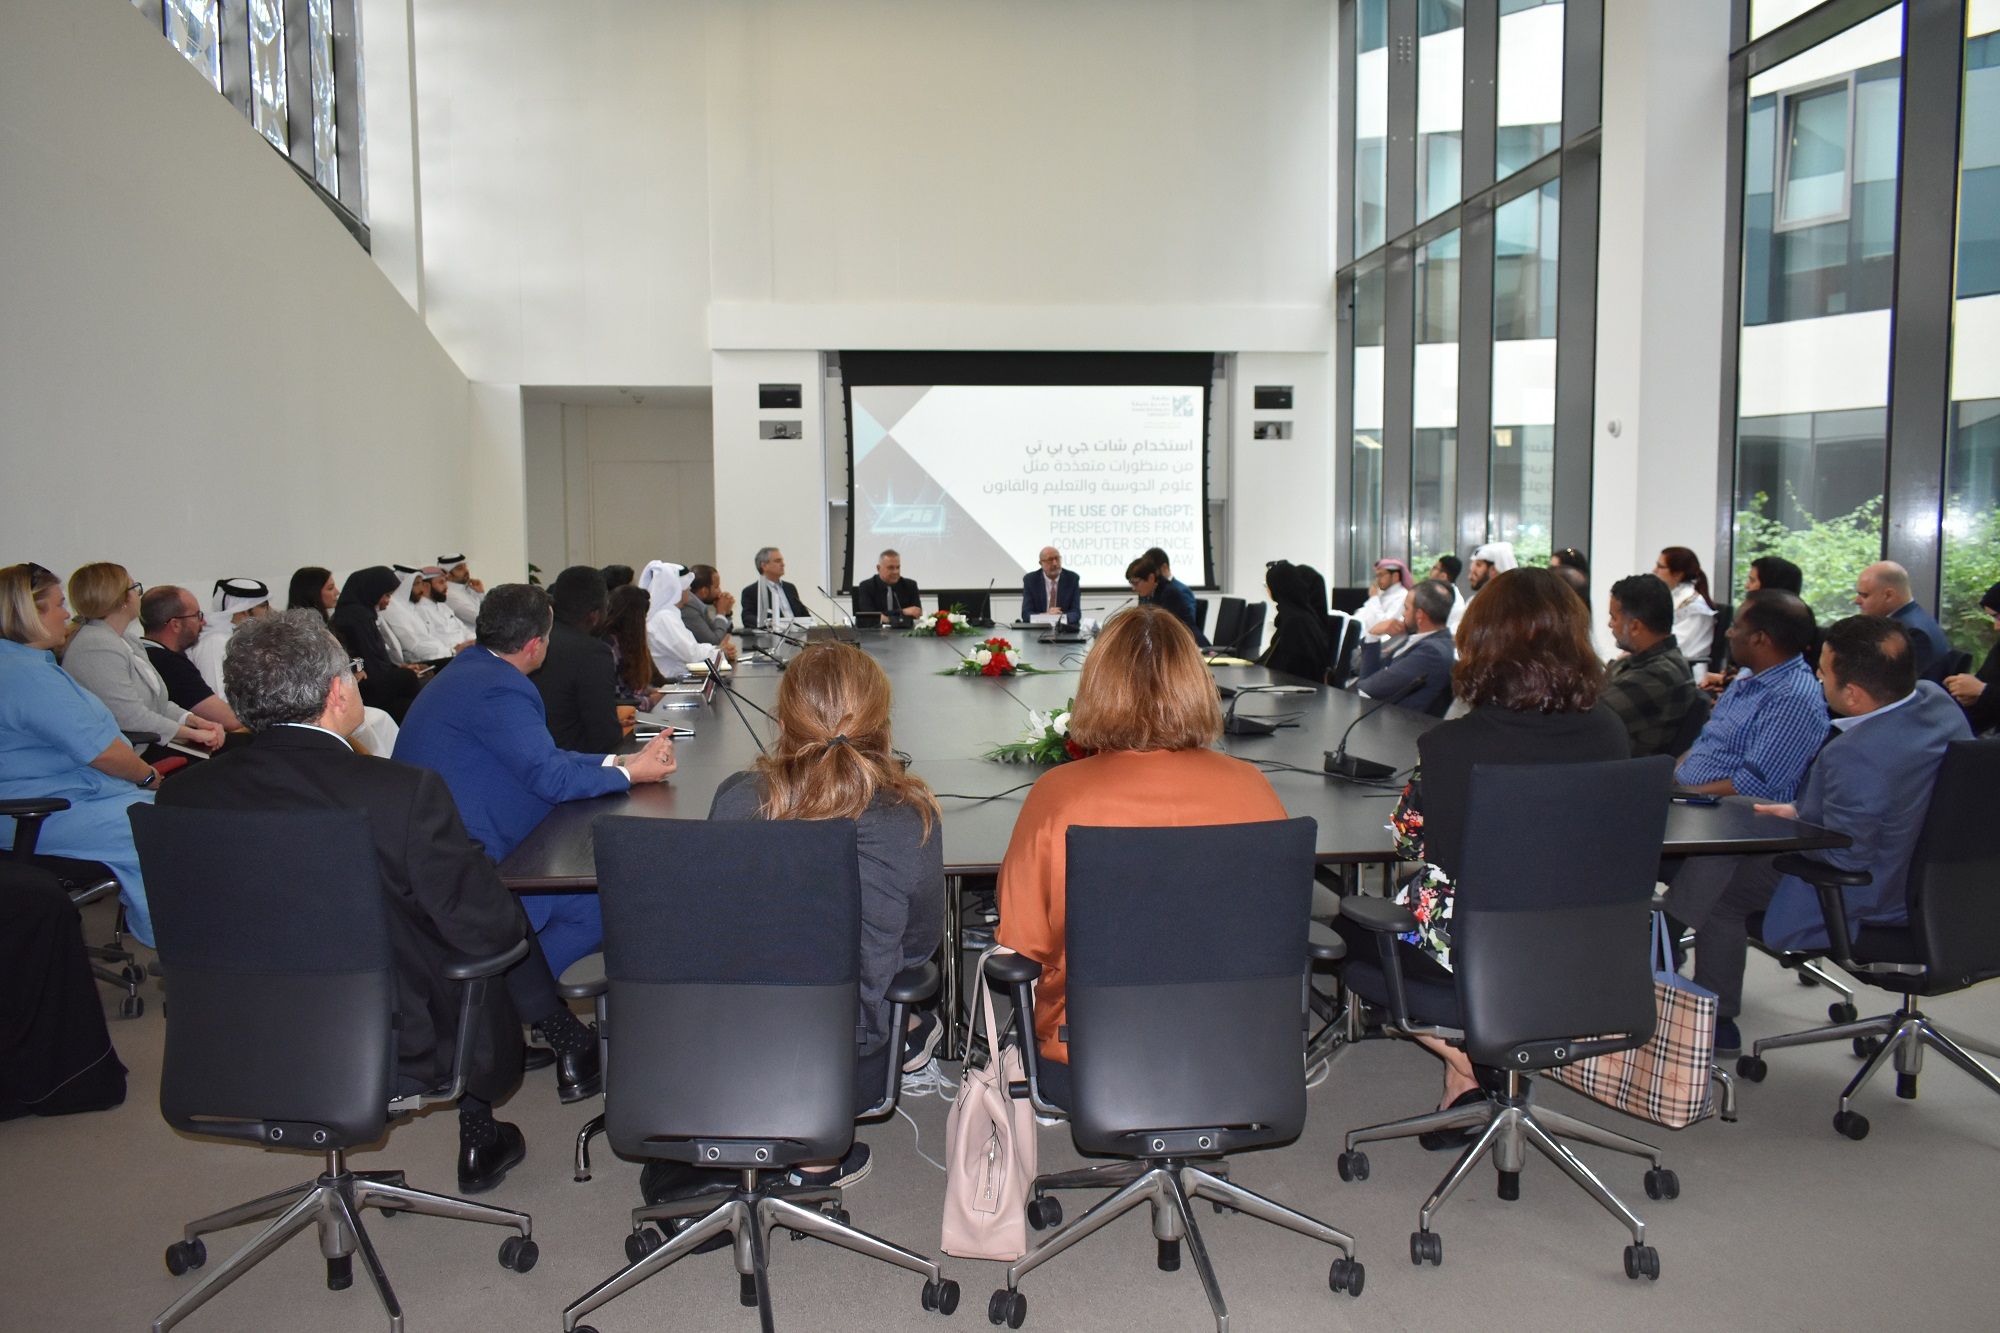 HBKU College of Law Hosts Talk on Impact of ChatGPT on Education and Law